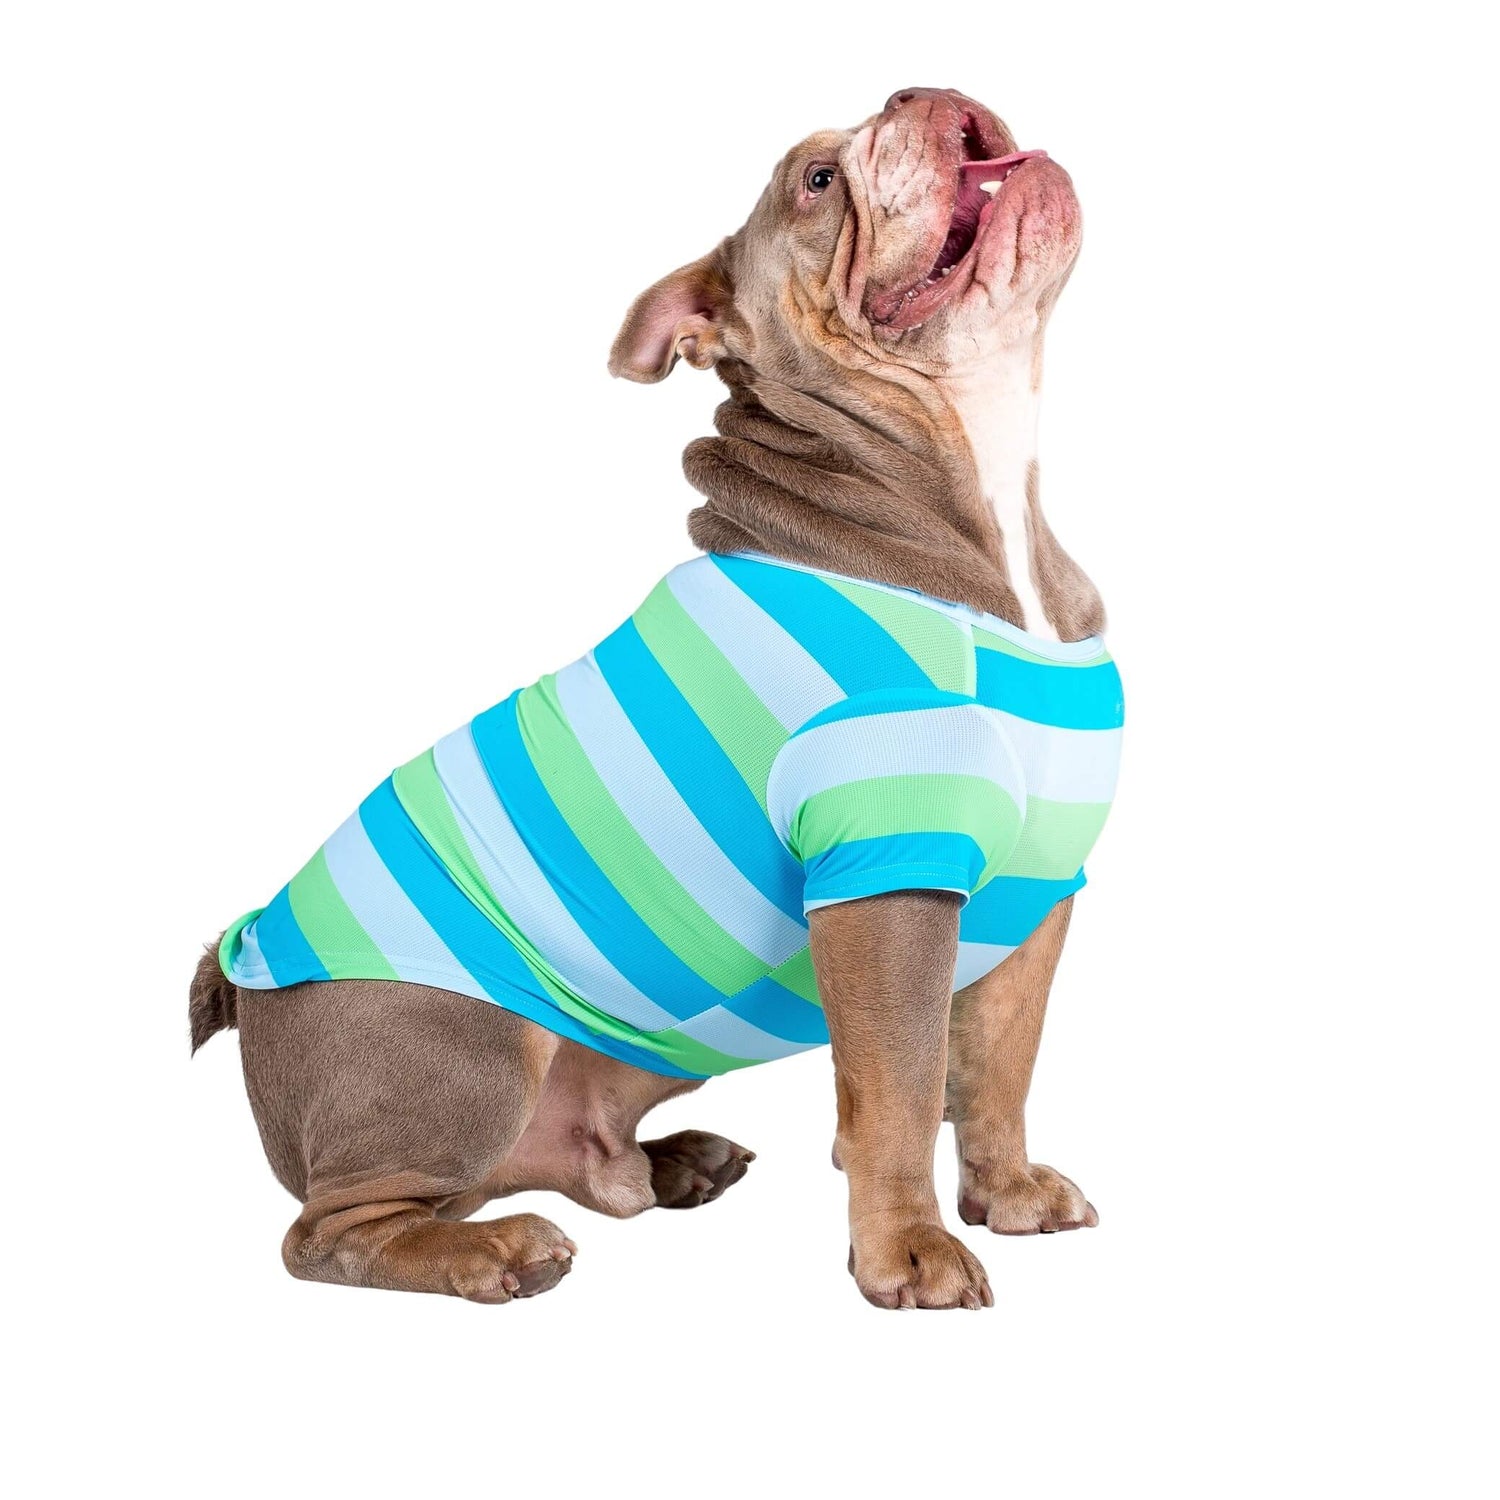 An English Bulldog standing side on. The dog is wearing Vibrangt Hounds Seriously Stripey cooling tee.